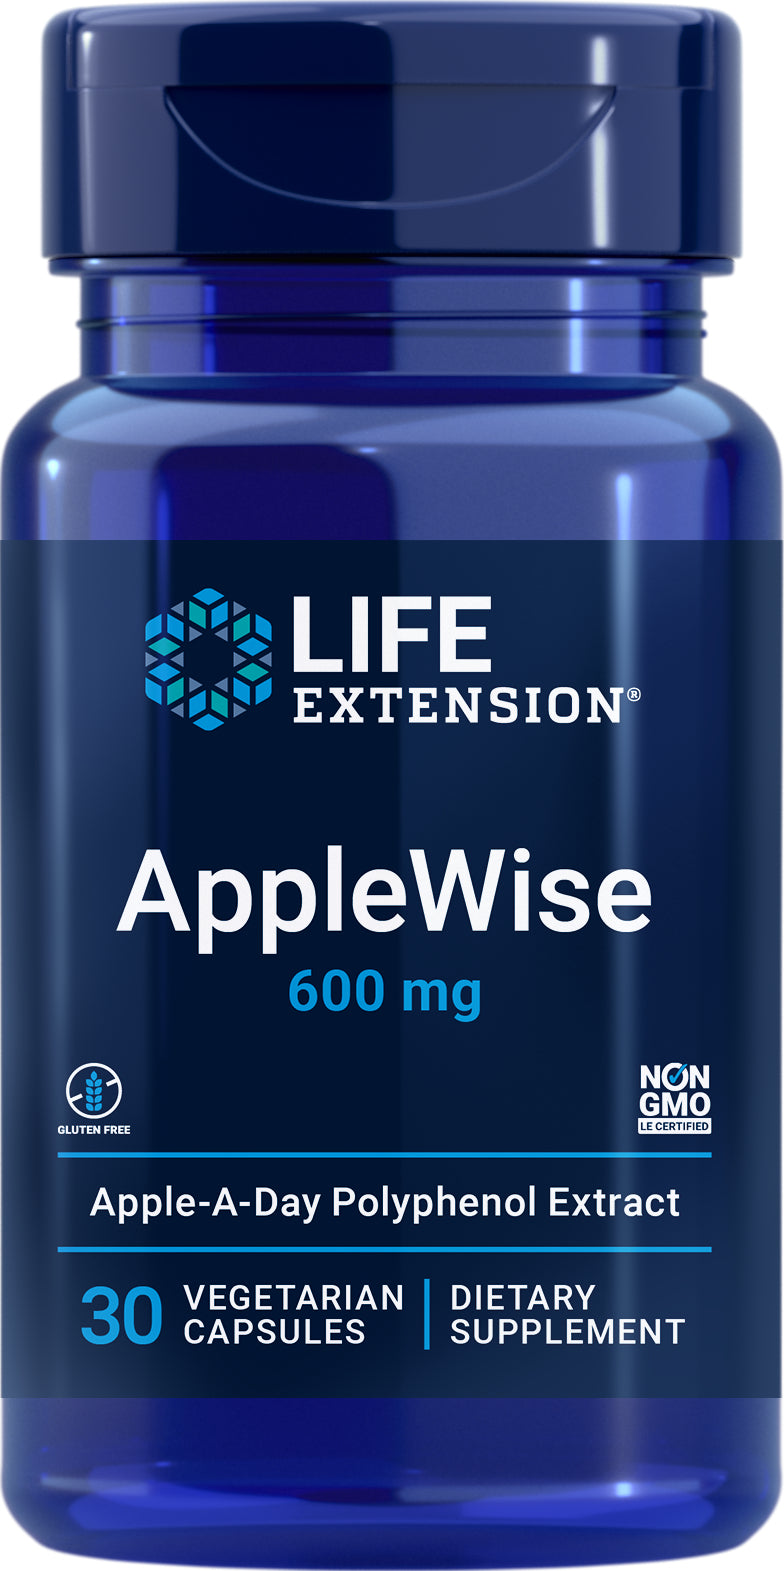 AppleWise 600 mg, 30 veg caps by Life Extension